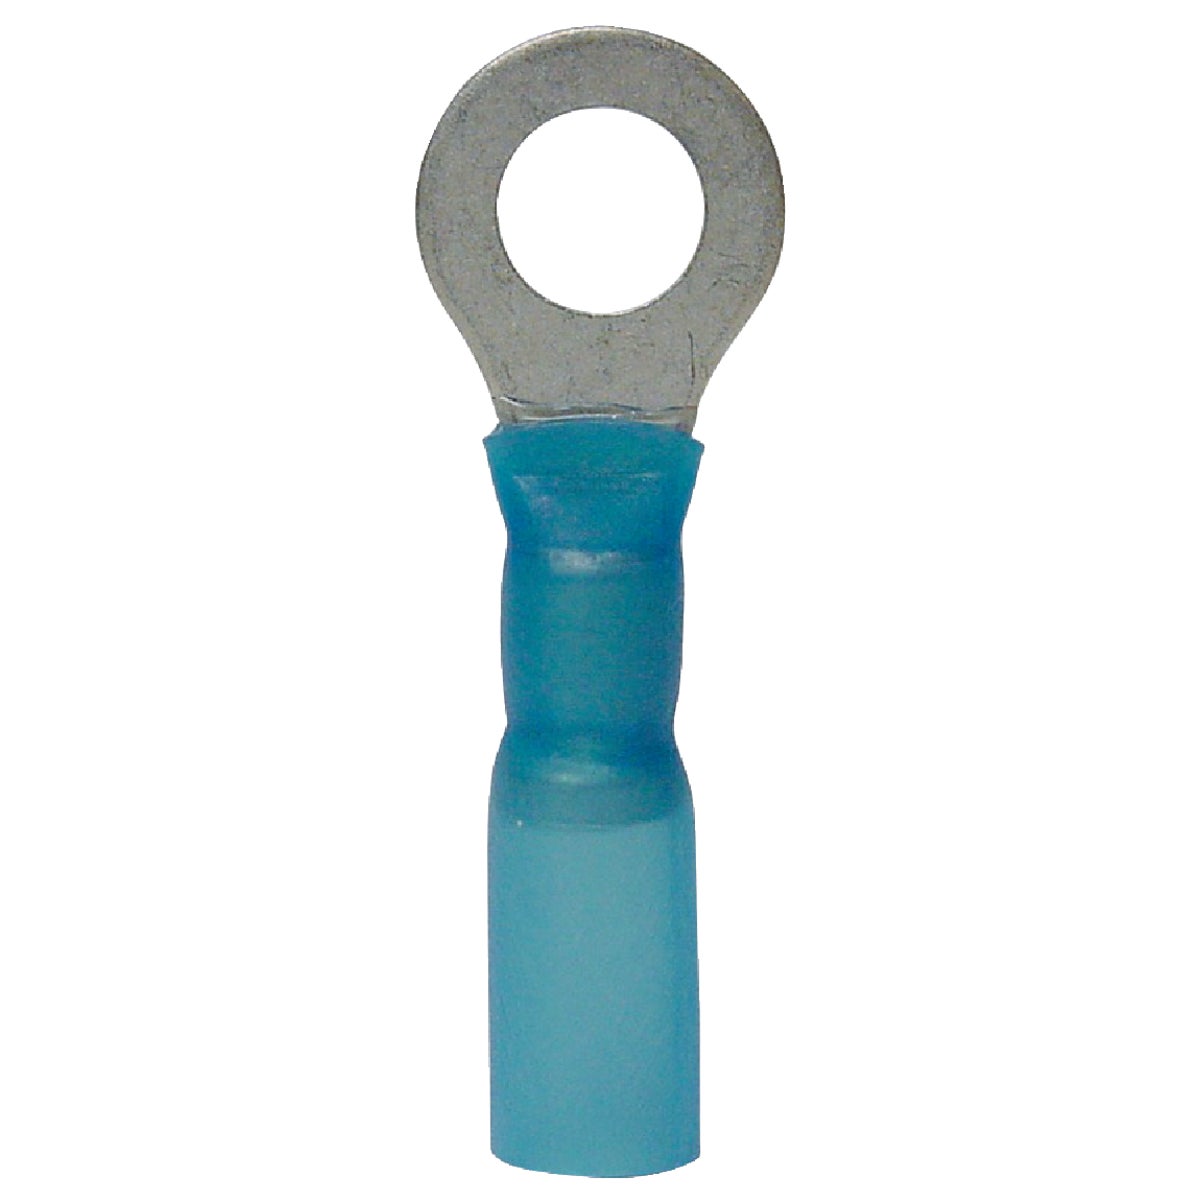 Item 562912, Ring terminal featuring an adhesive lining to waterproof and 